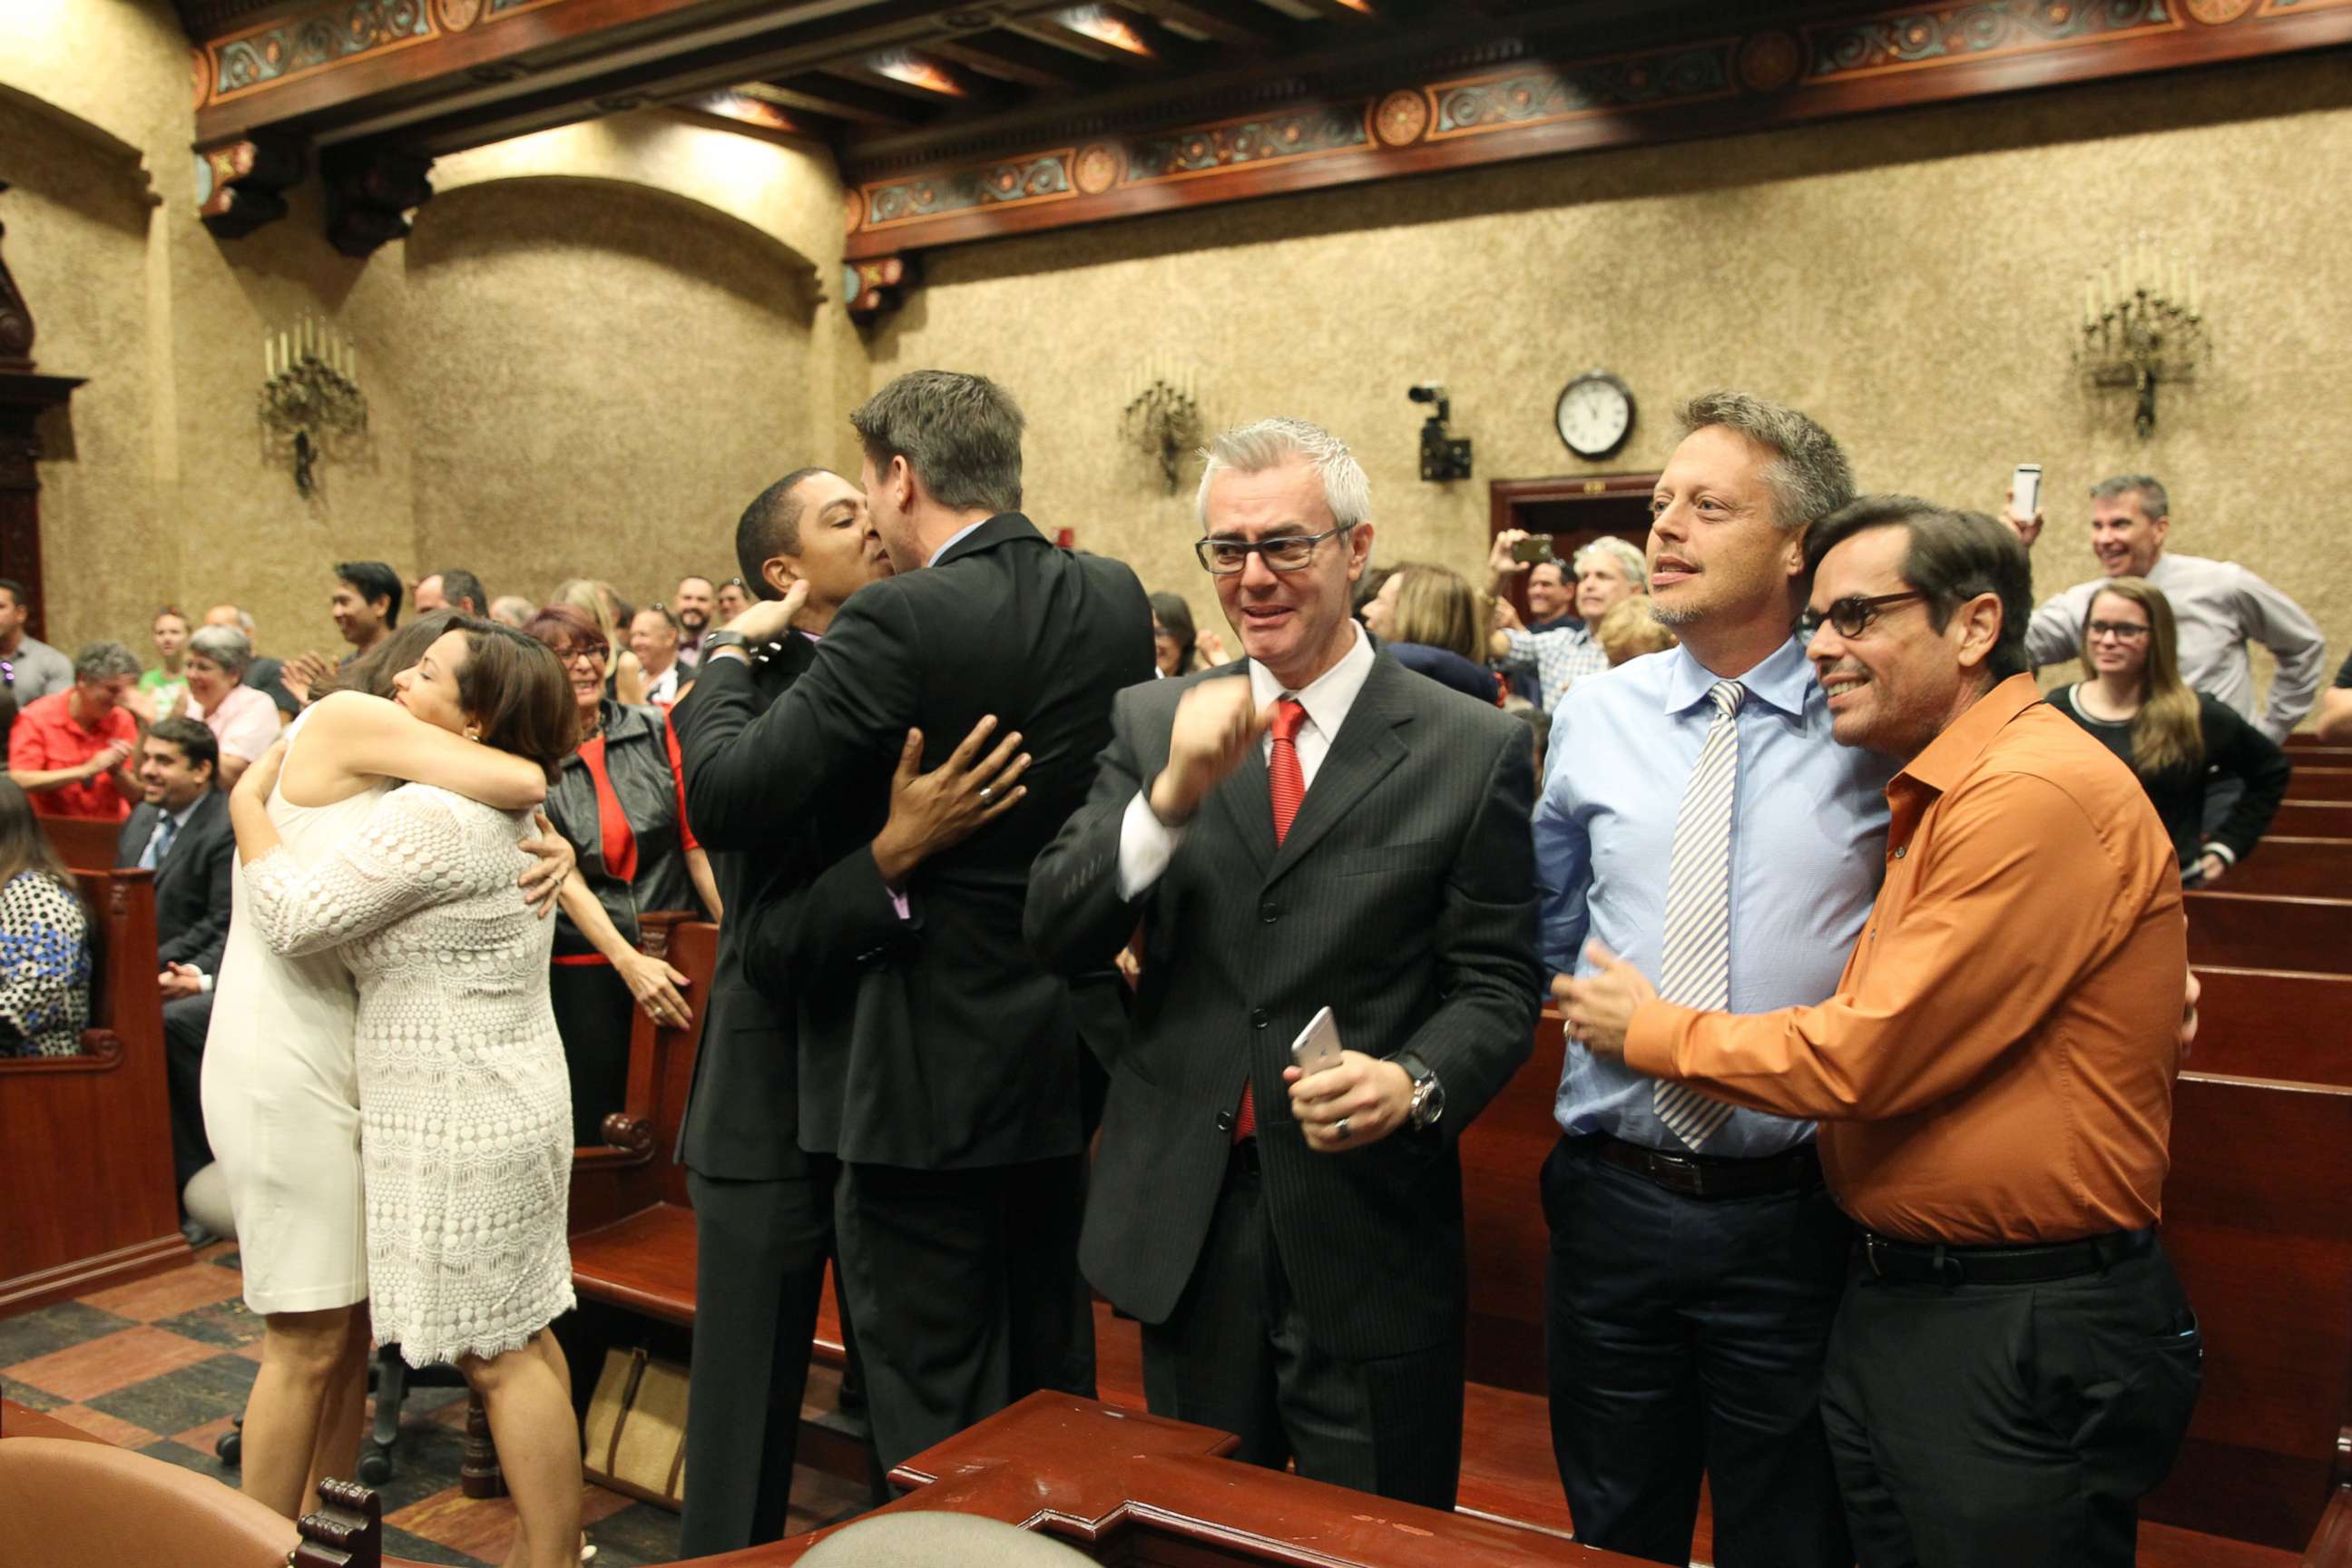 PHOTO: Same-sex couples who had previously challenged the wedding ban Don Johnston and Jorge Diaz react in court, after Circuit Court Judge Sarah Zabel lifted the stay, allowing same-sex couples to marry, Jan. 5, 2015, in Miami.  